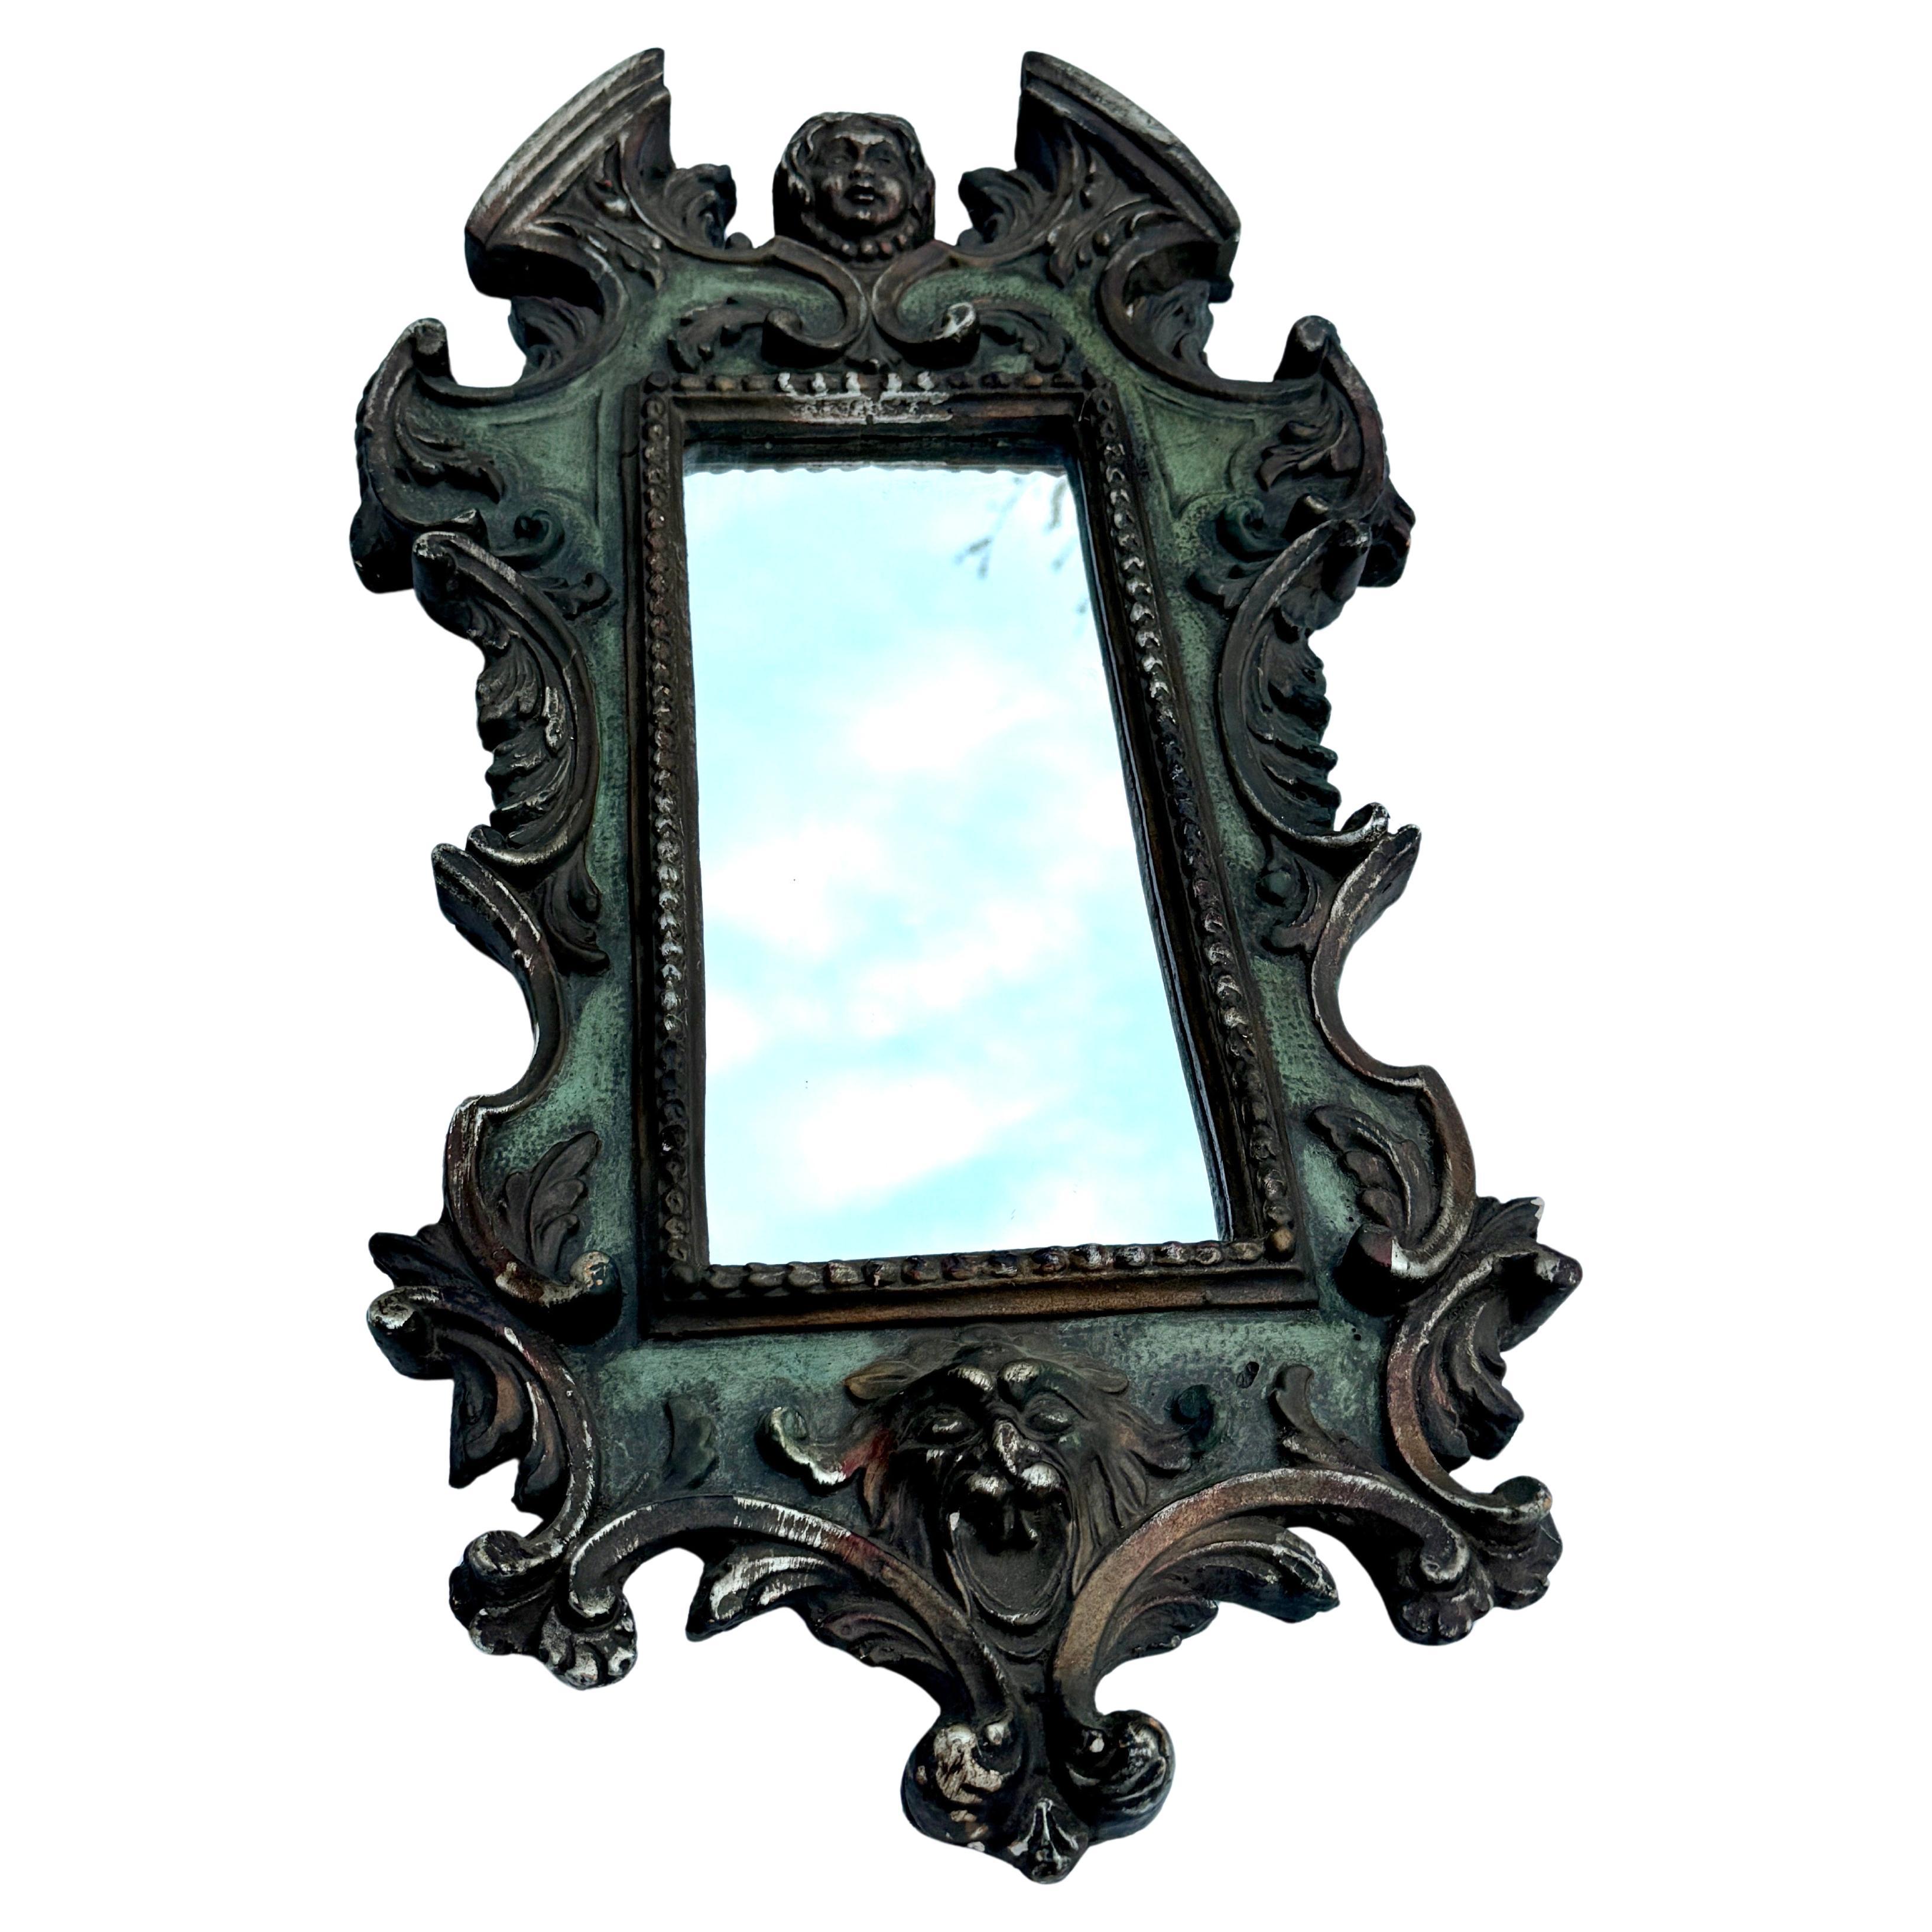 Late 19th Century Italian Baroque-Style Gilded Wall Mirror

Elegant carved wall mirror characterized by elaborate decorations including Italian puttis. The color of the mirror is green with darker accents coming through. This mirror is a very